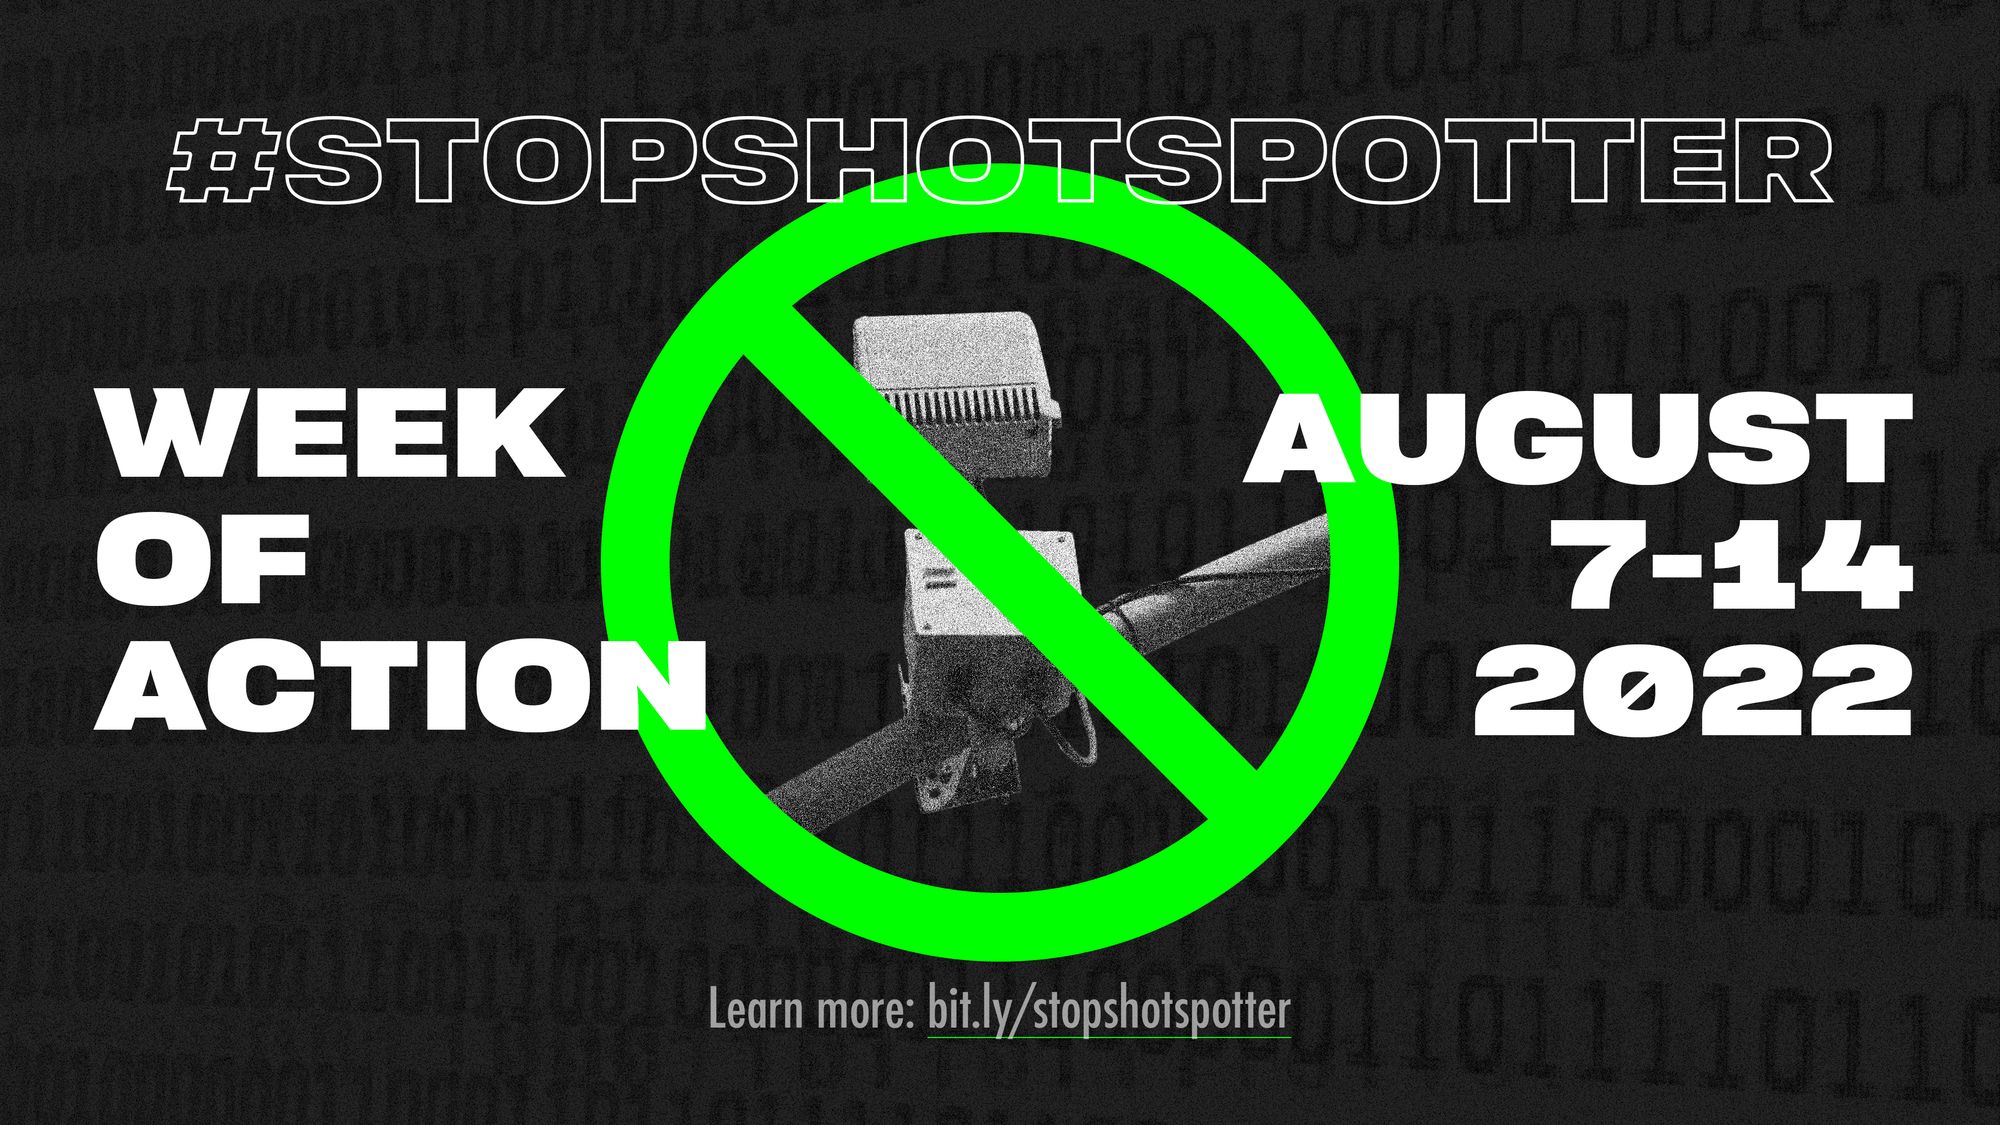 Privacy News August 9: StopShotspotter Week of Action and more